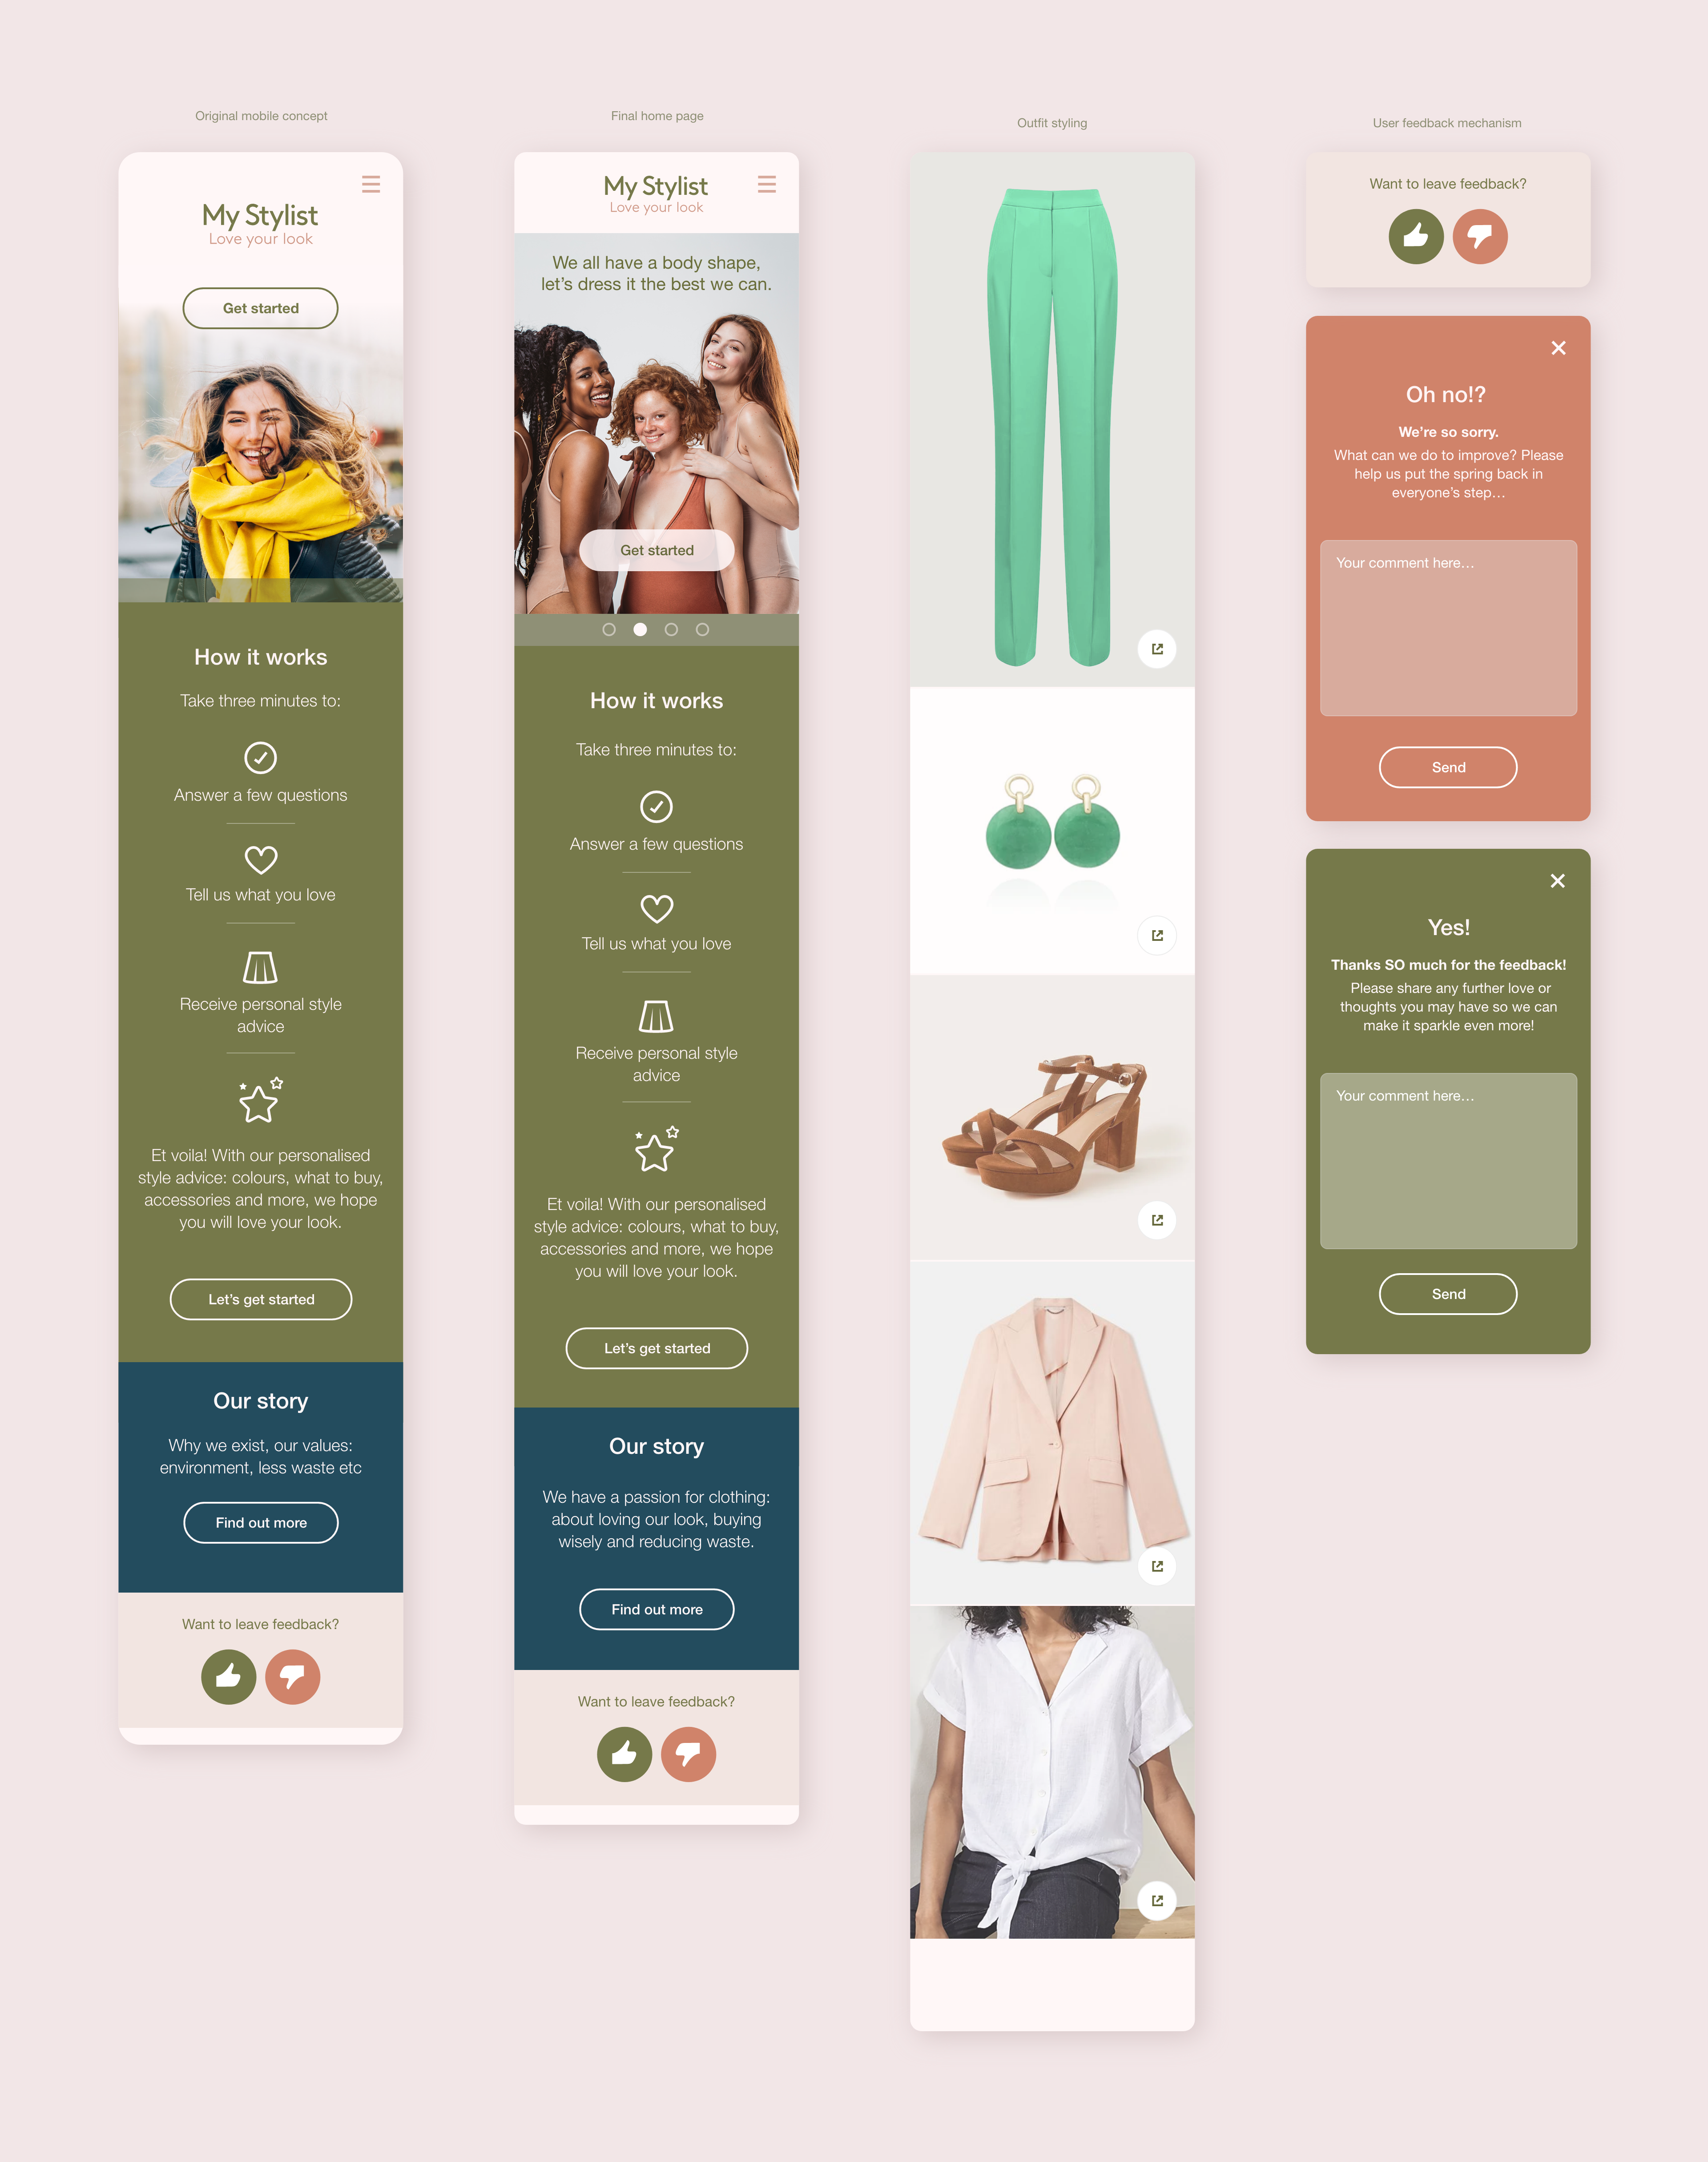 My Stylist - Initial mobile design user interface designs